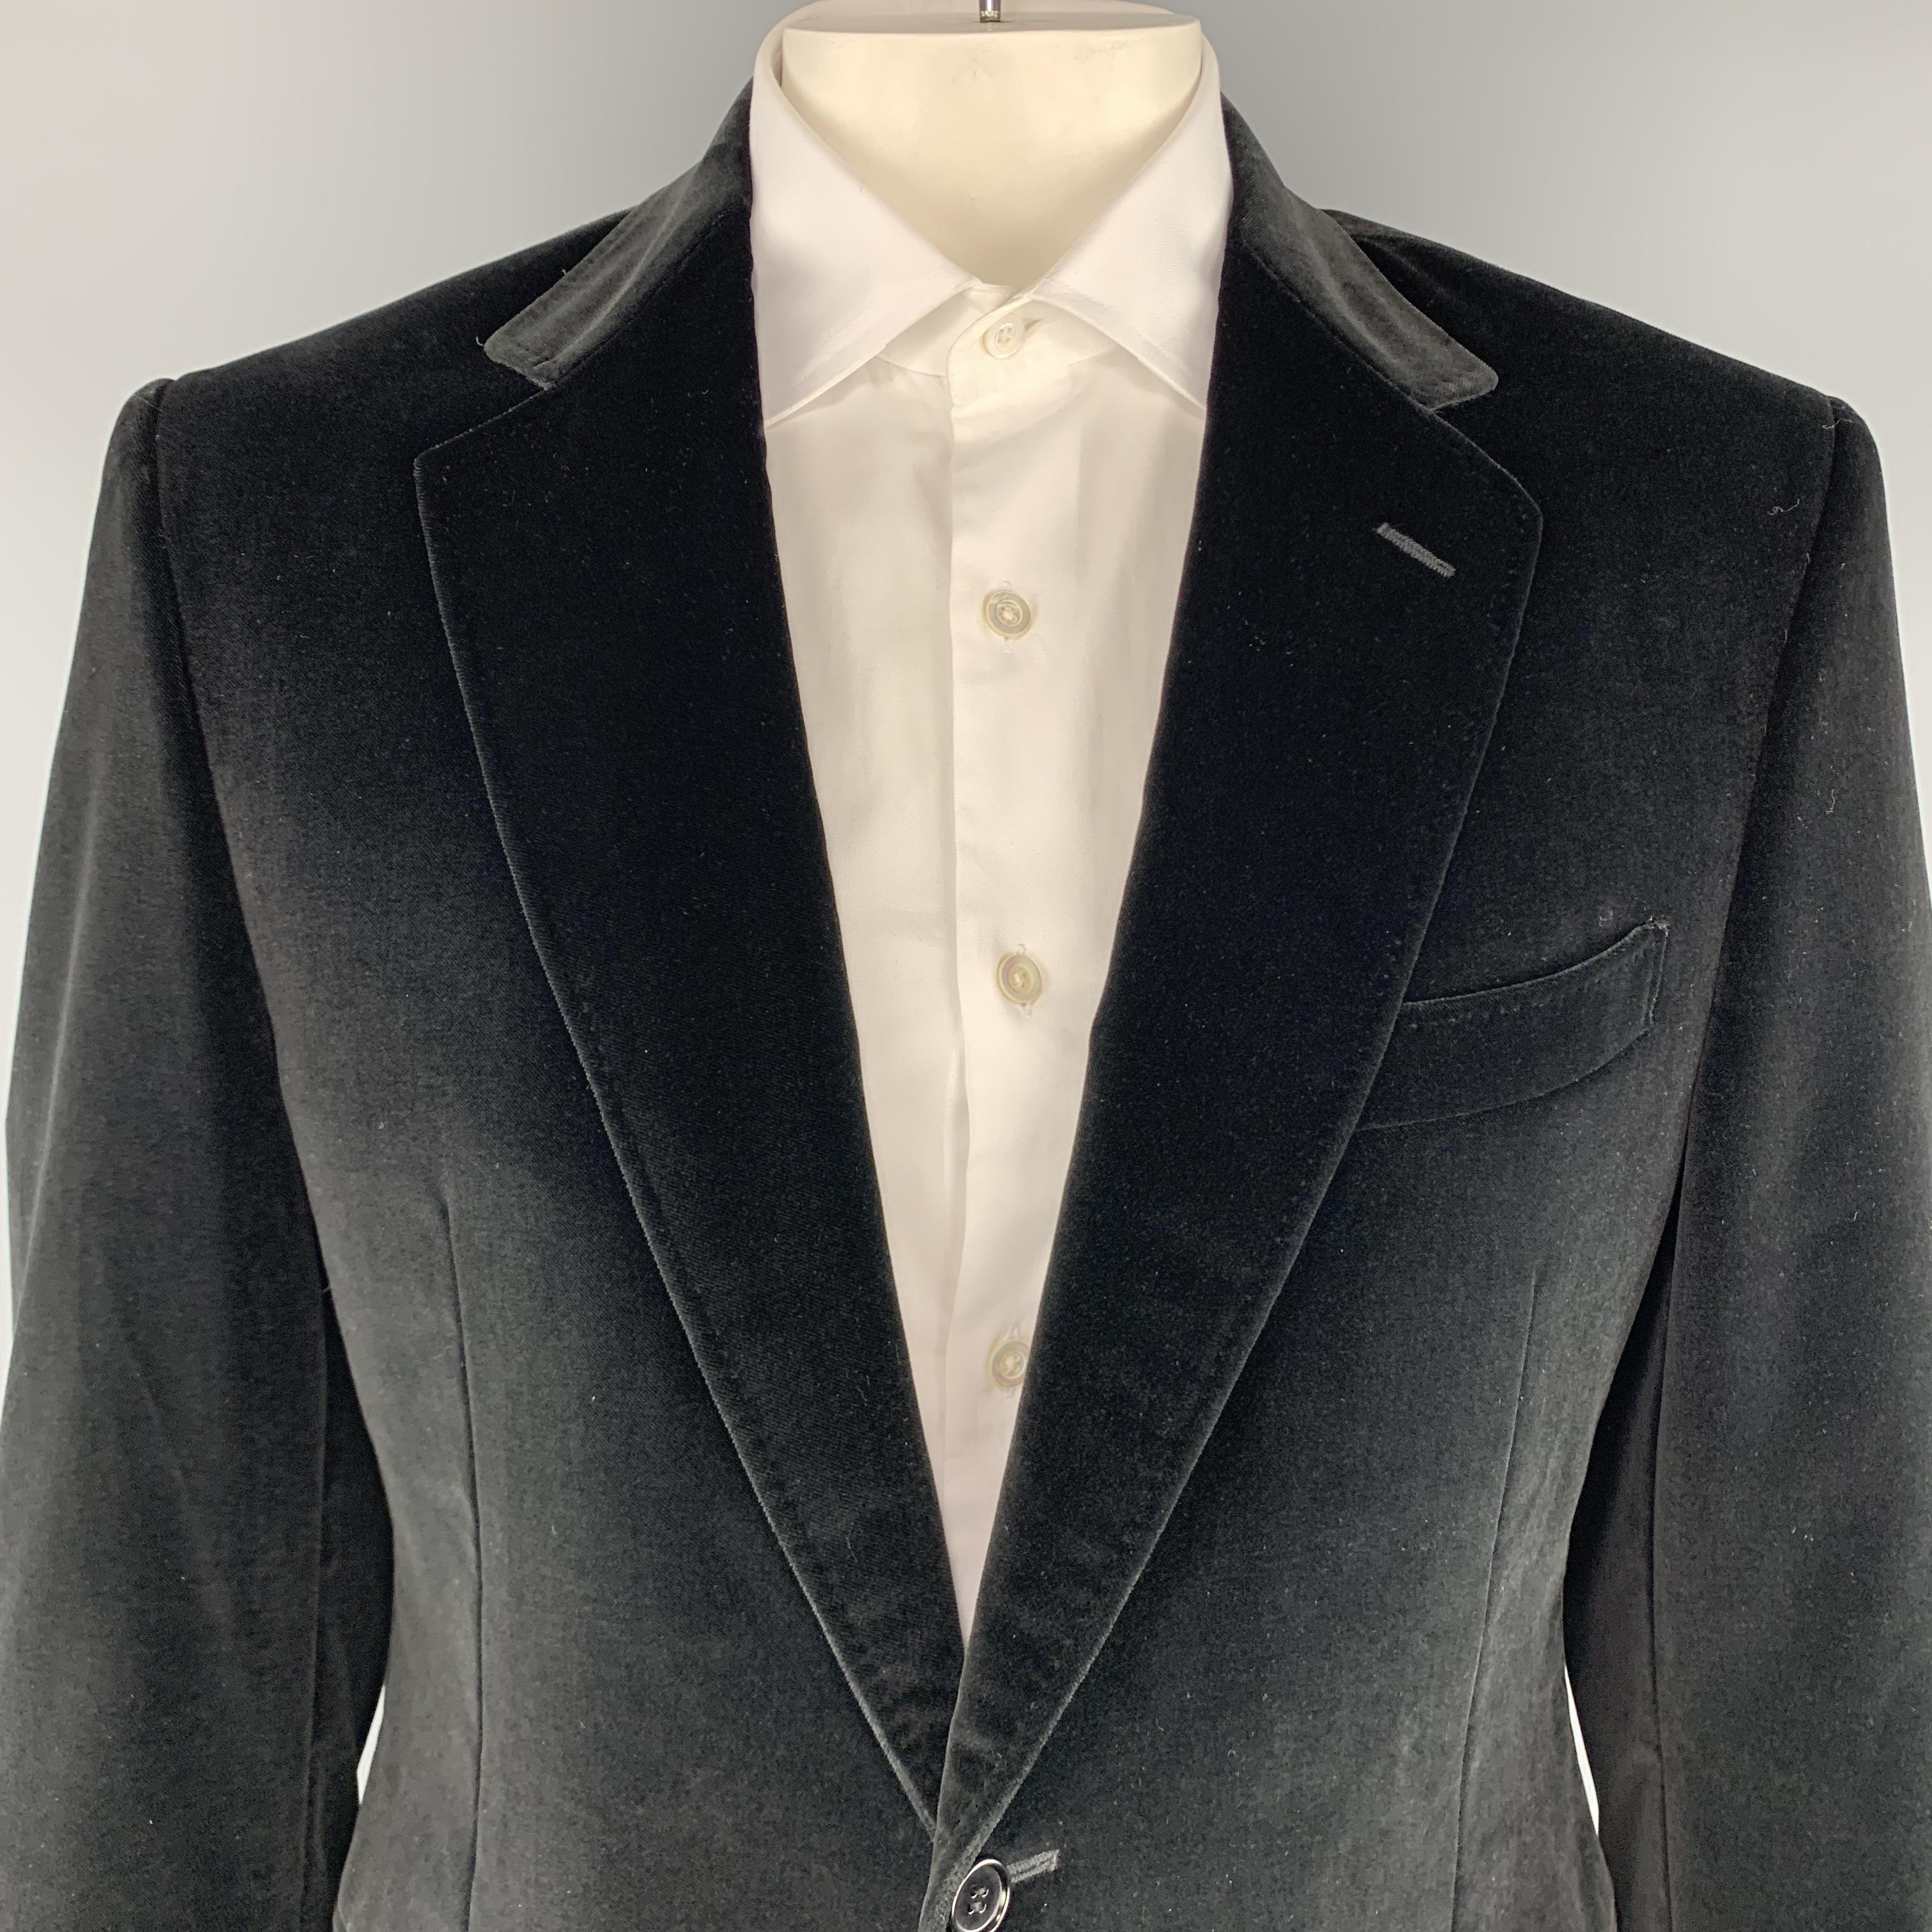 CANALI sport coat comes in black velvet with a notch lapel, single breasted, two button front, and single vented back. Made in Italy.

Excellent Pre-Owned Condition.
Marked: IT 52 R

Measurements:

Shoulder: 19 in.
Chest: 46 in.
Sleeve: 25 in.